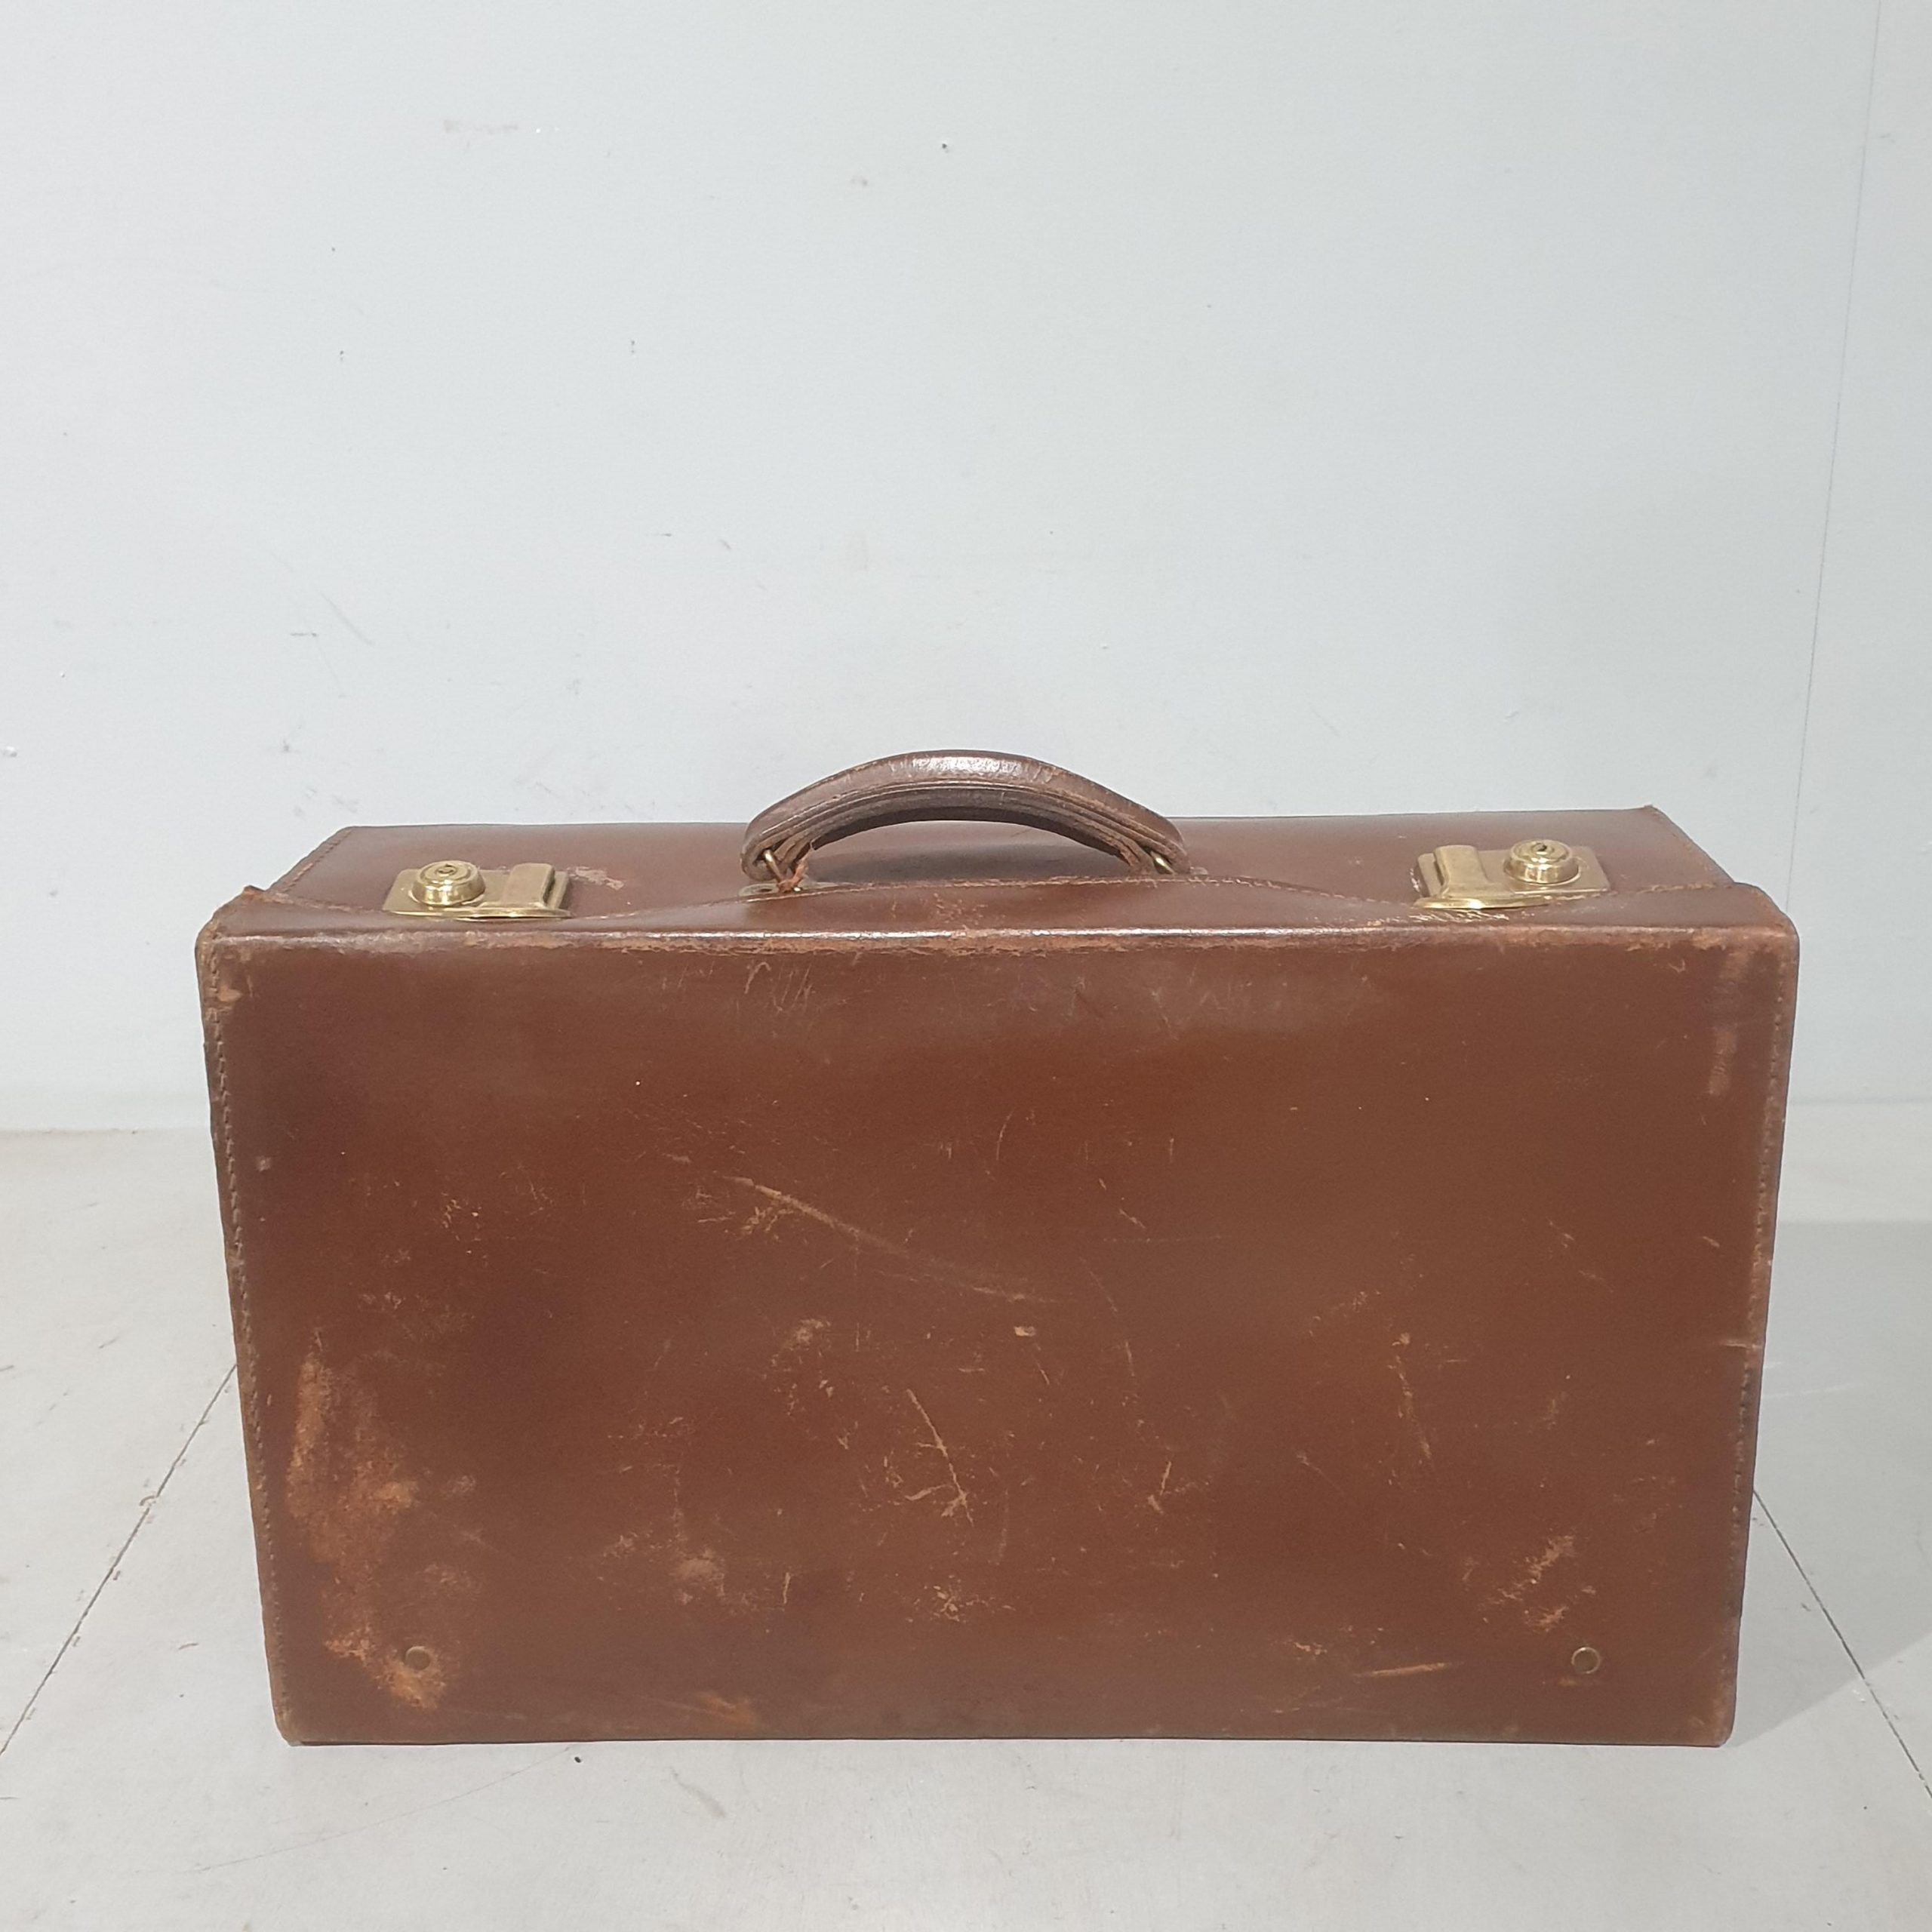 Antique Officer's Case, English, Leather, Travel, Suitcase